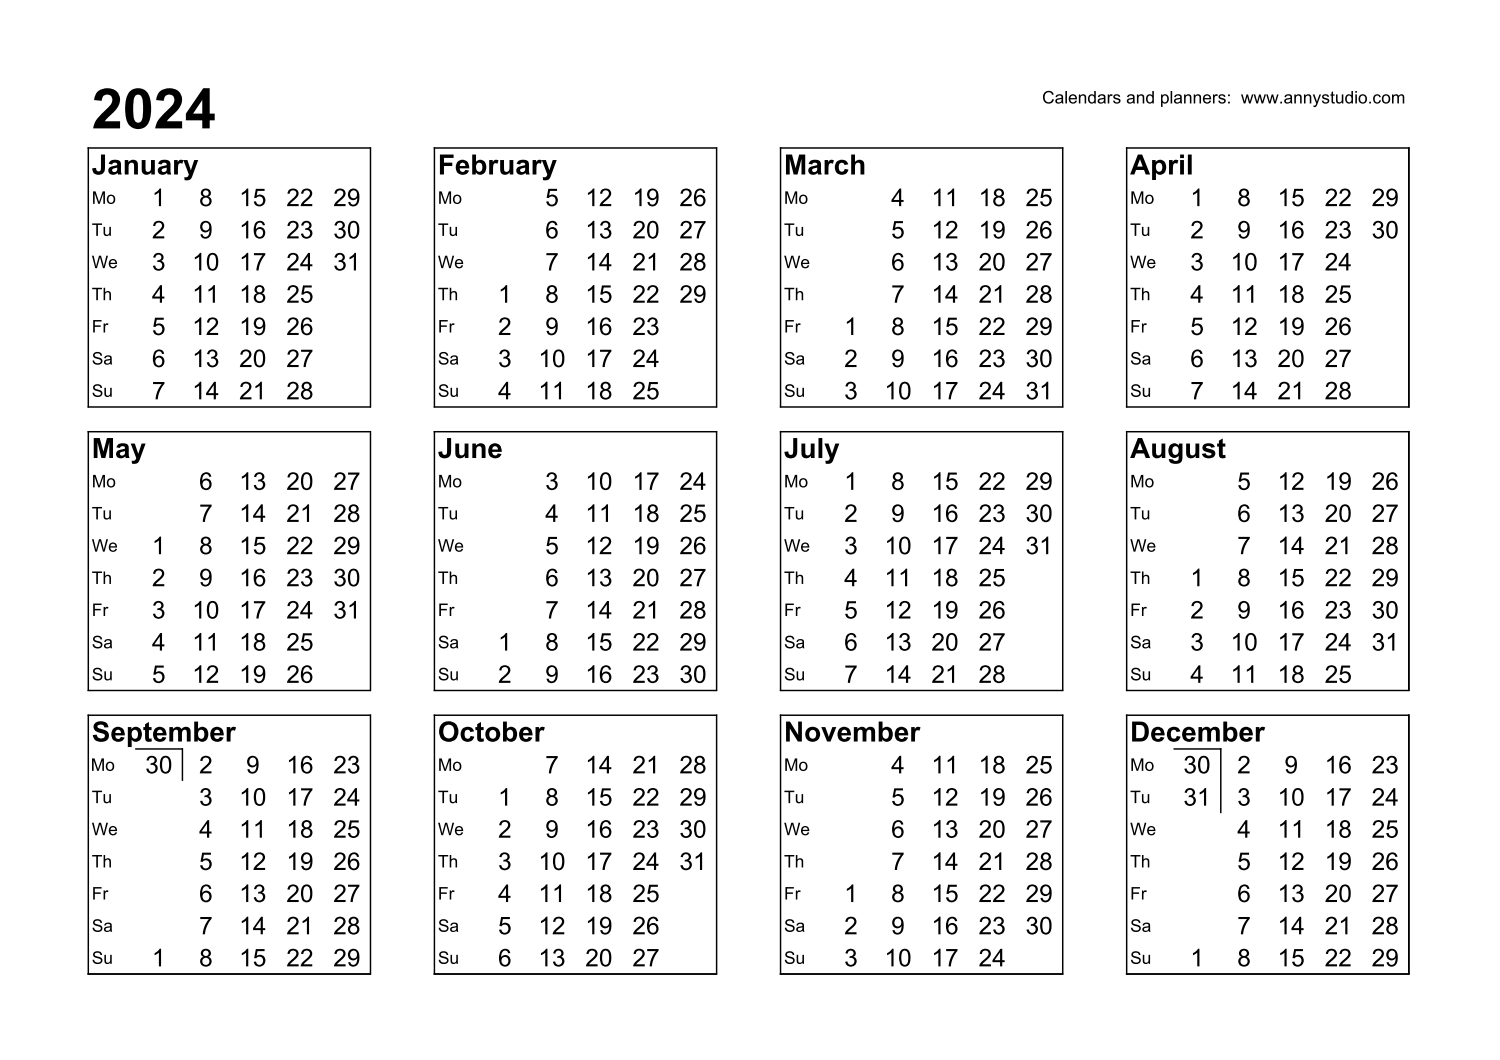 2024 Calendar With The Weeks Numbered Blank 2024 Calendar